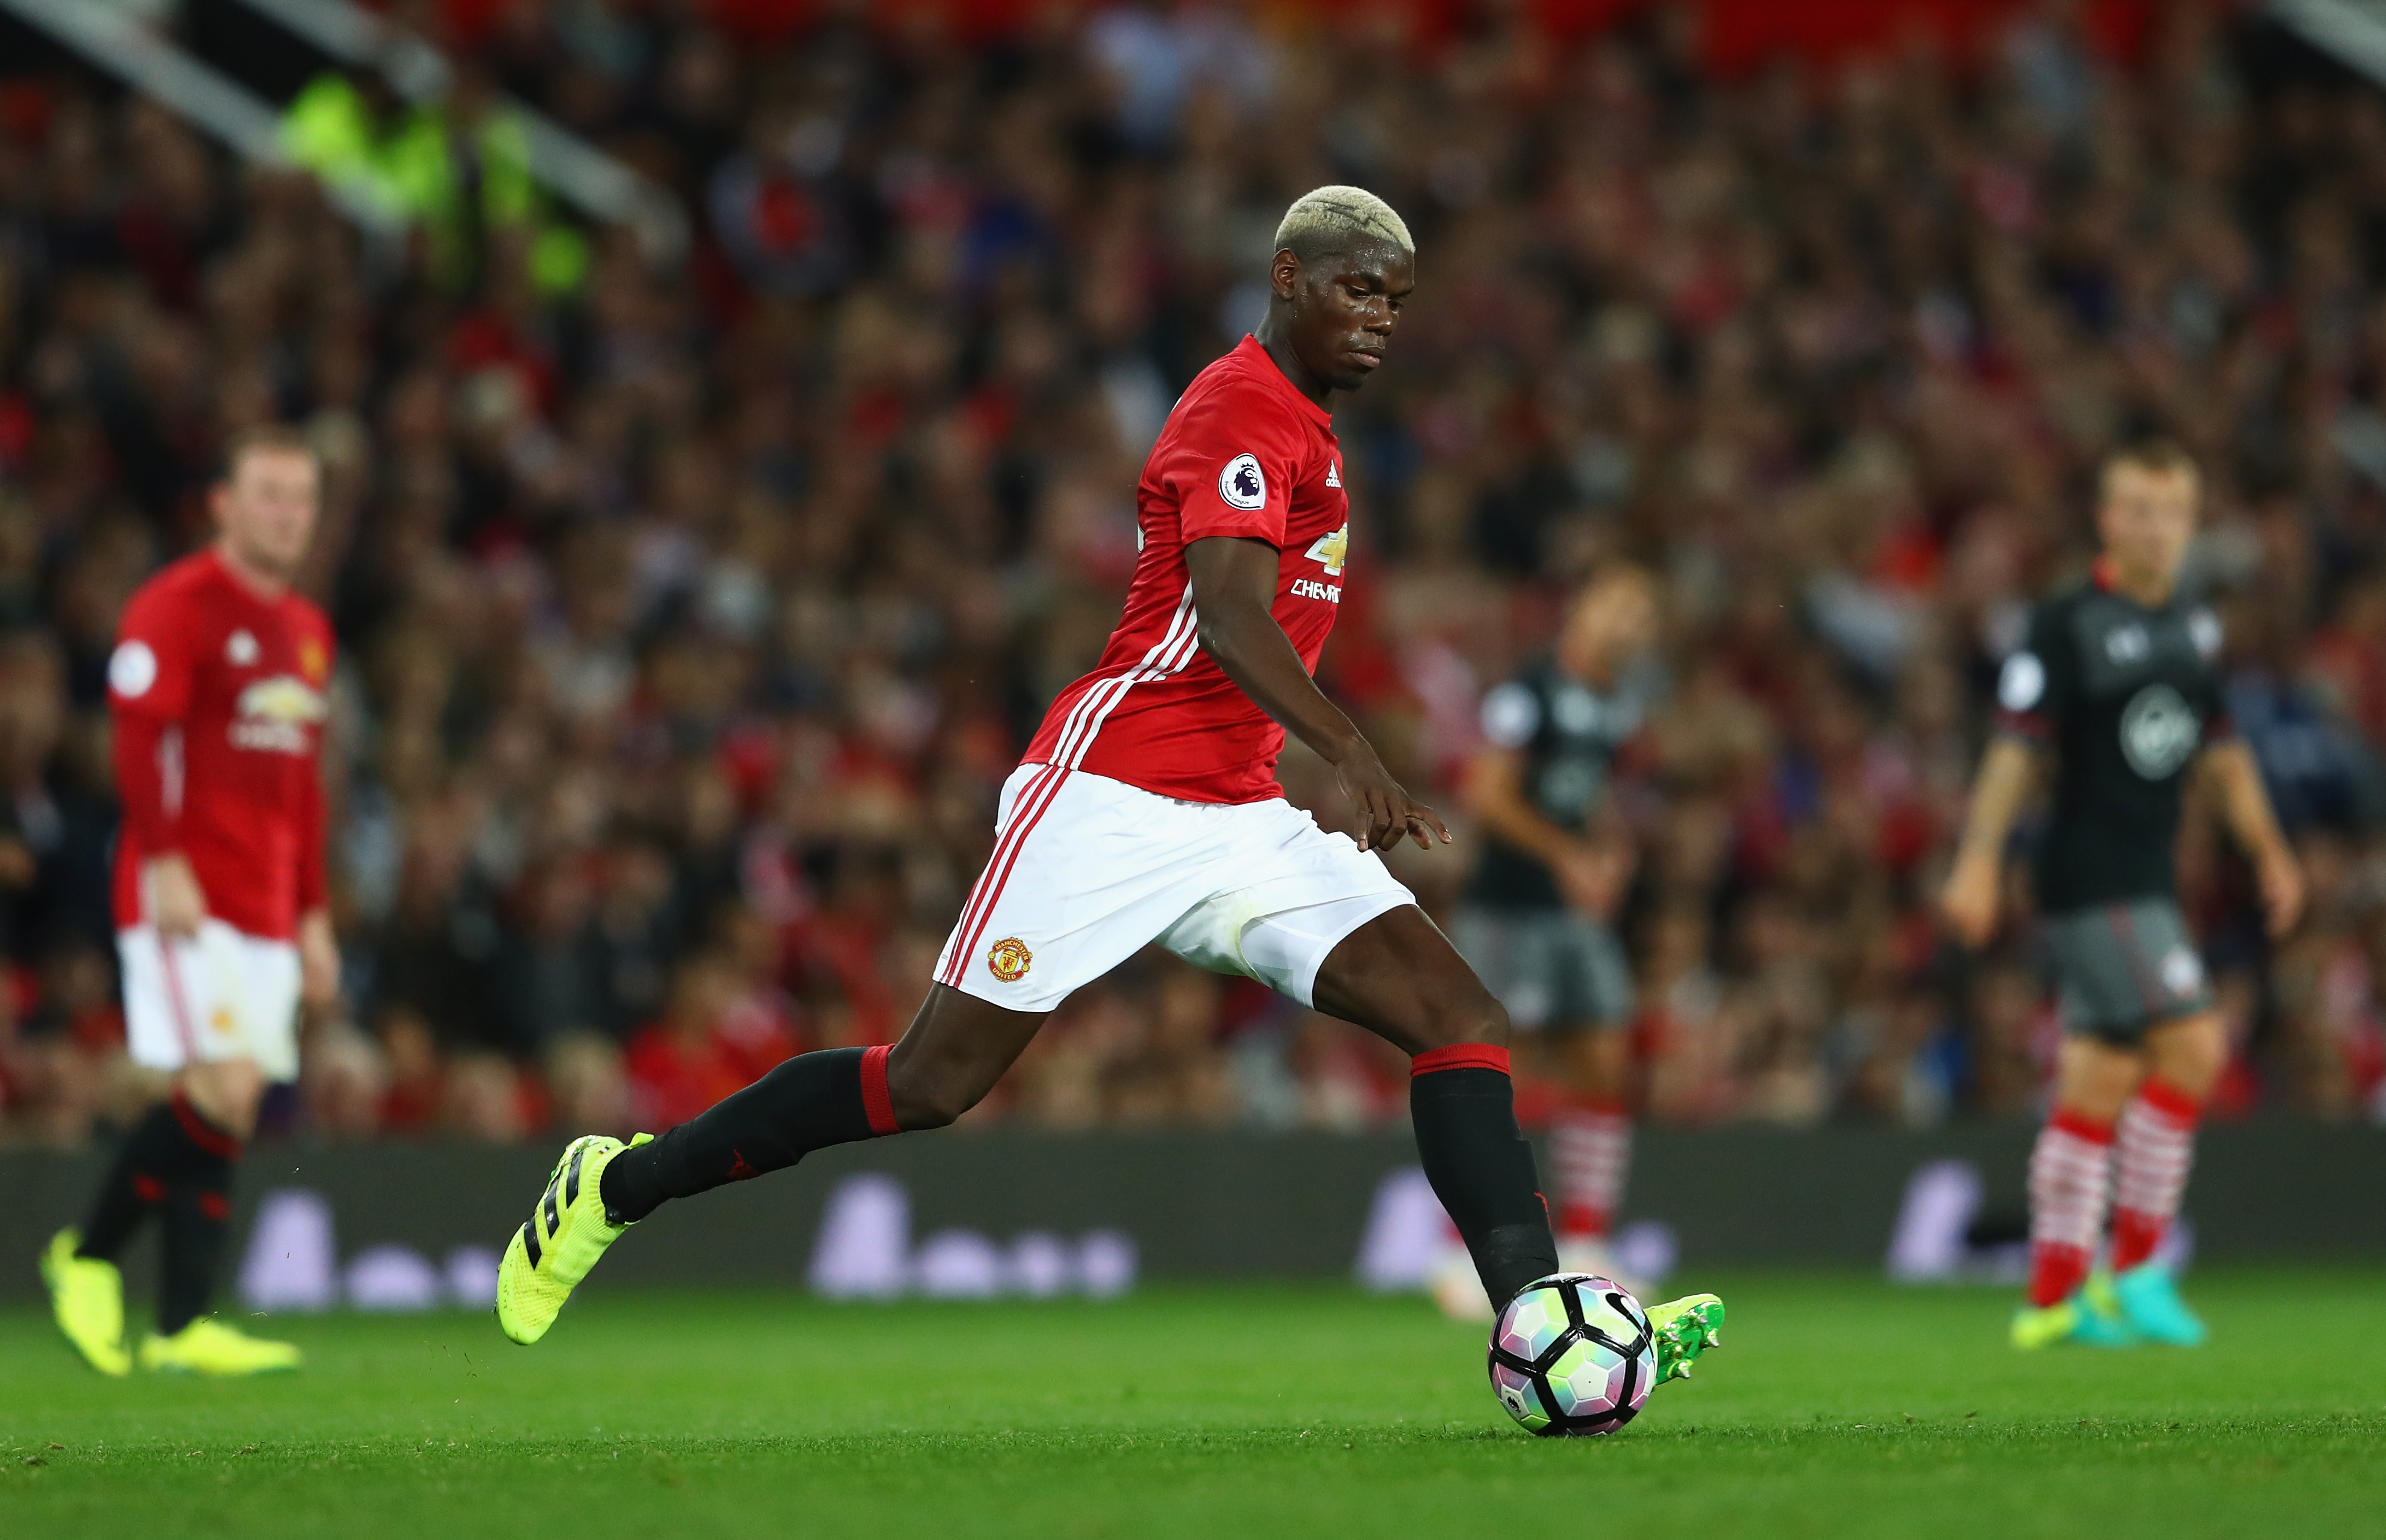 MANCHESTER, ENGLAND - AUGUST 19:  Paul Pogba of Manchester United in action during the Premier League match between Manchester United and Southampton at Old Trafford on August 19, 2016 in Manchester, England.  (Photo by Michael Steele/Getty Images)